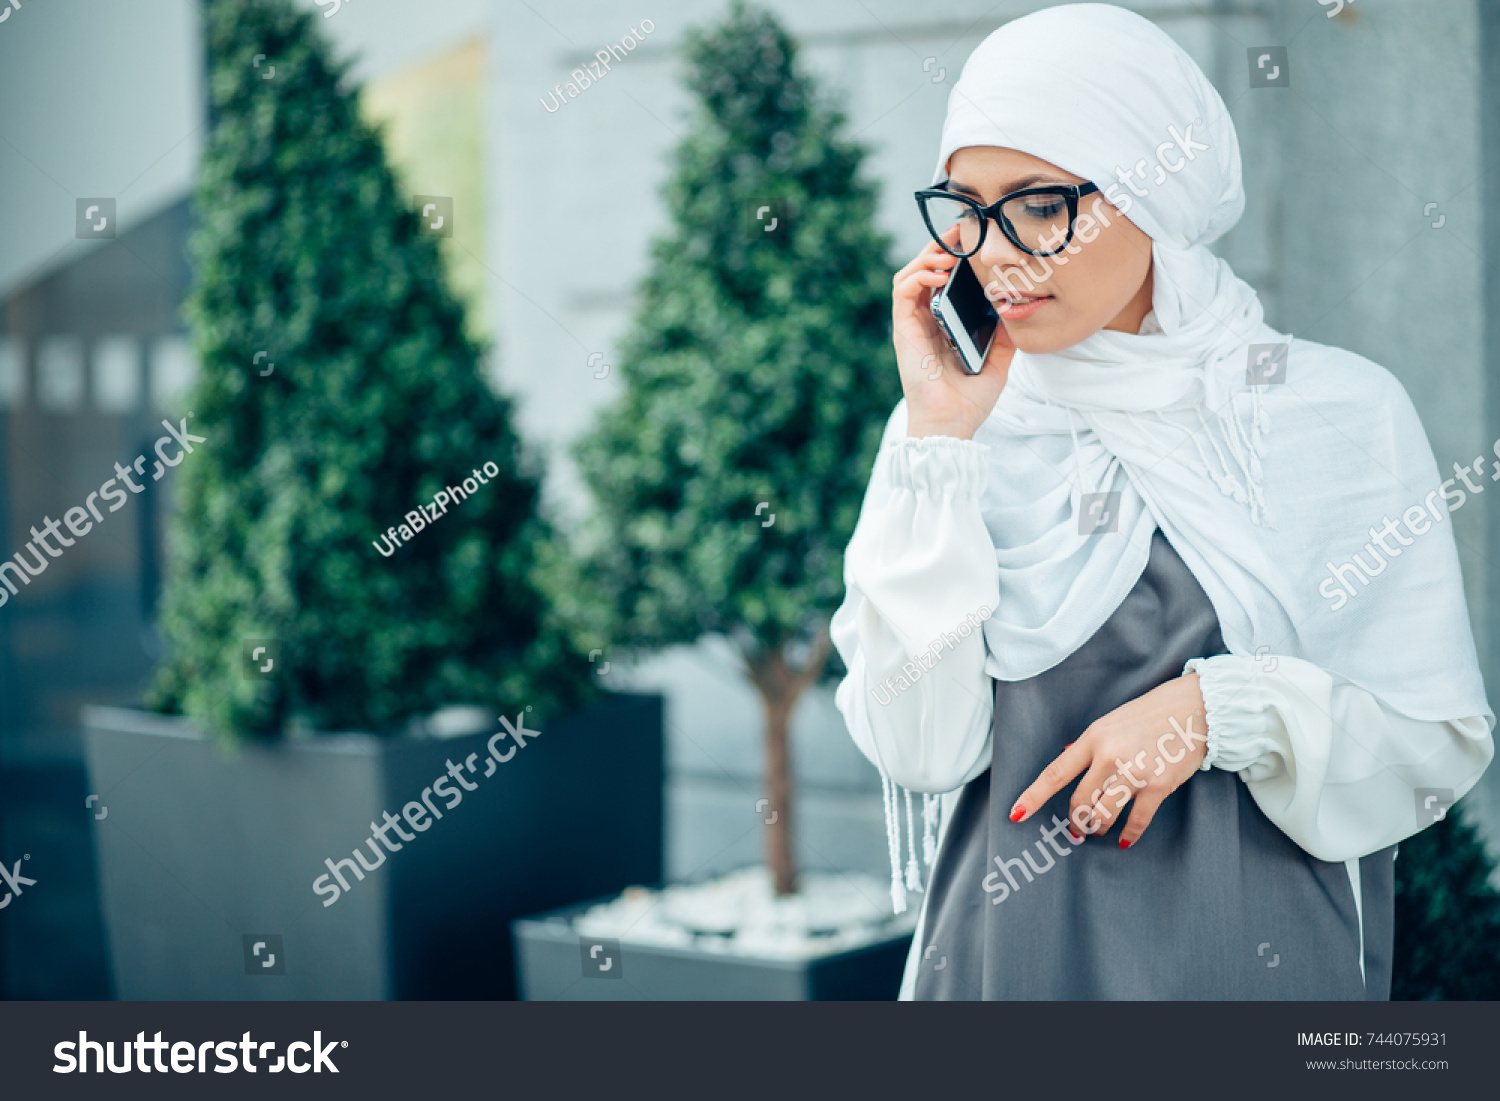 Happy young muslim woman with glasses talking on mobile phone at city street lifestyle portrait. outdoors #744075931